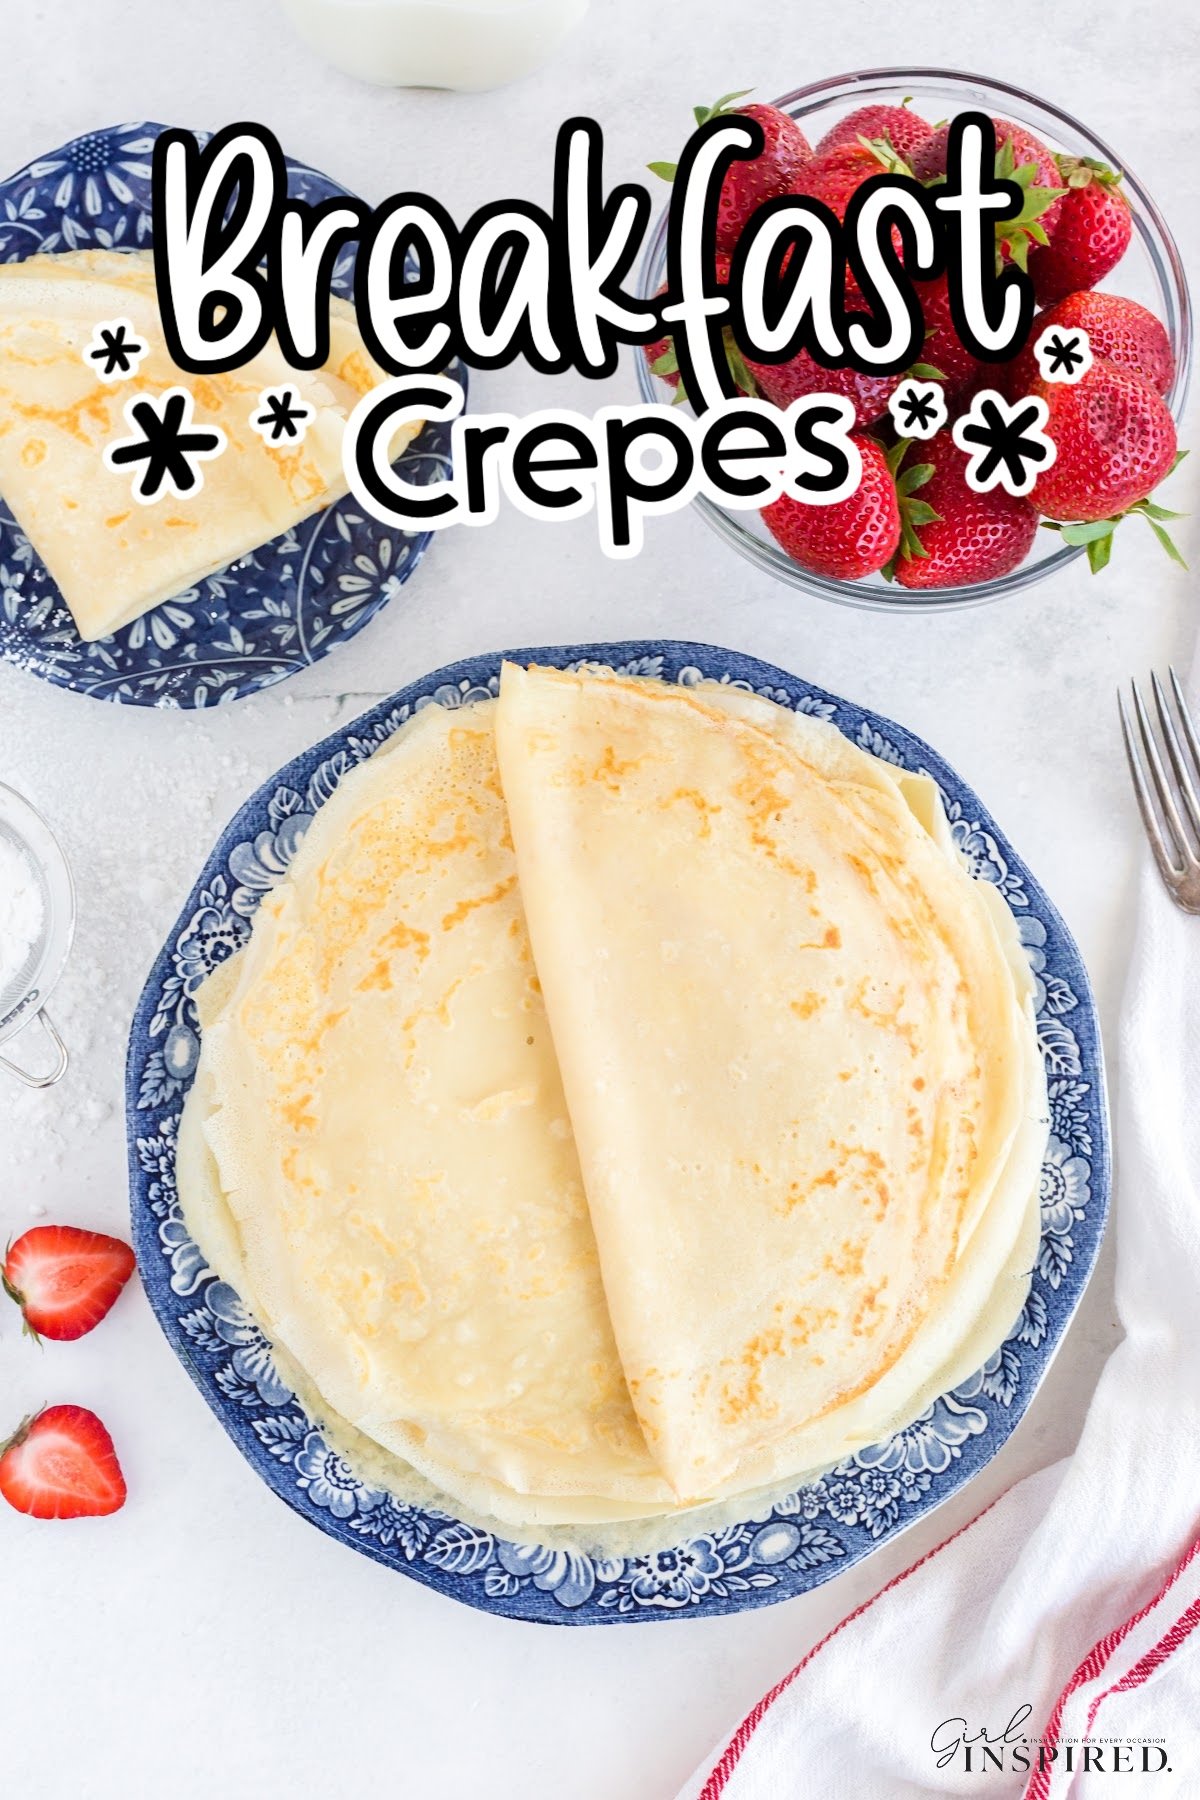 A stack of breakfast crepes on a plate next to a bowl of whole strawberries and a fork.